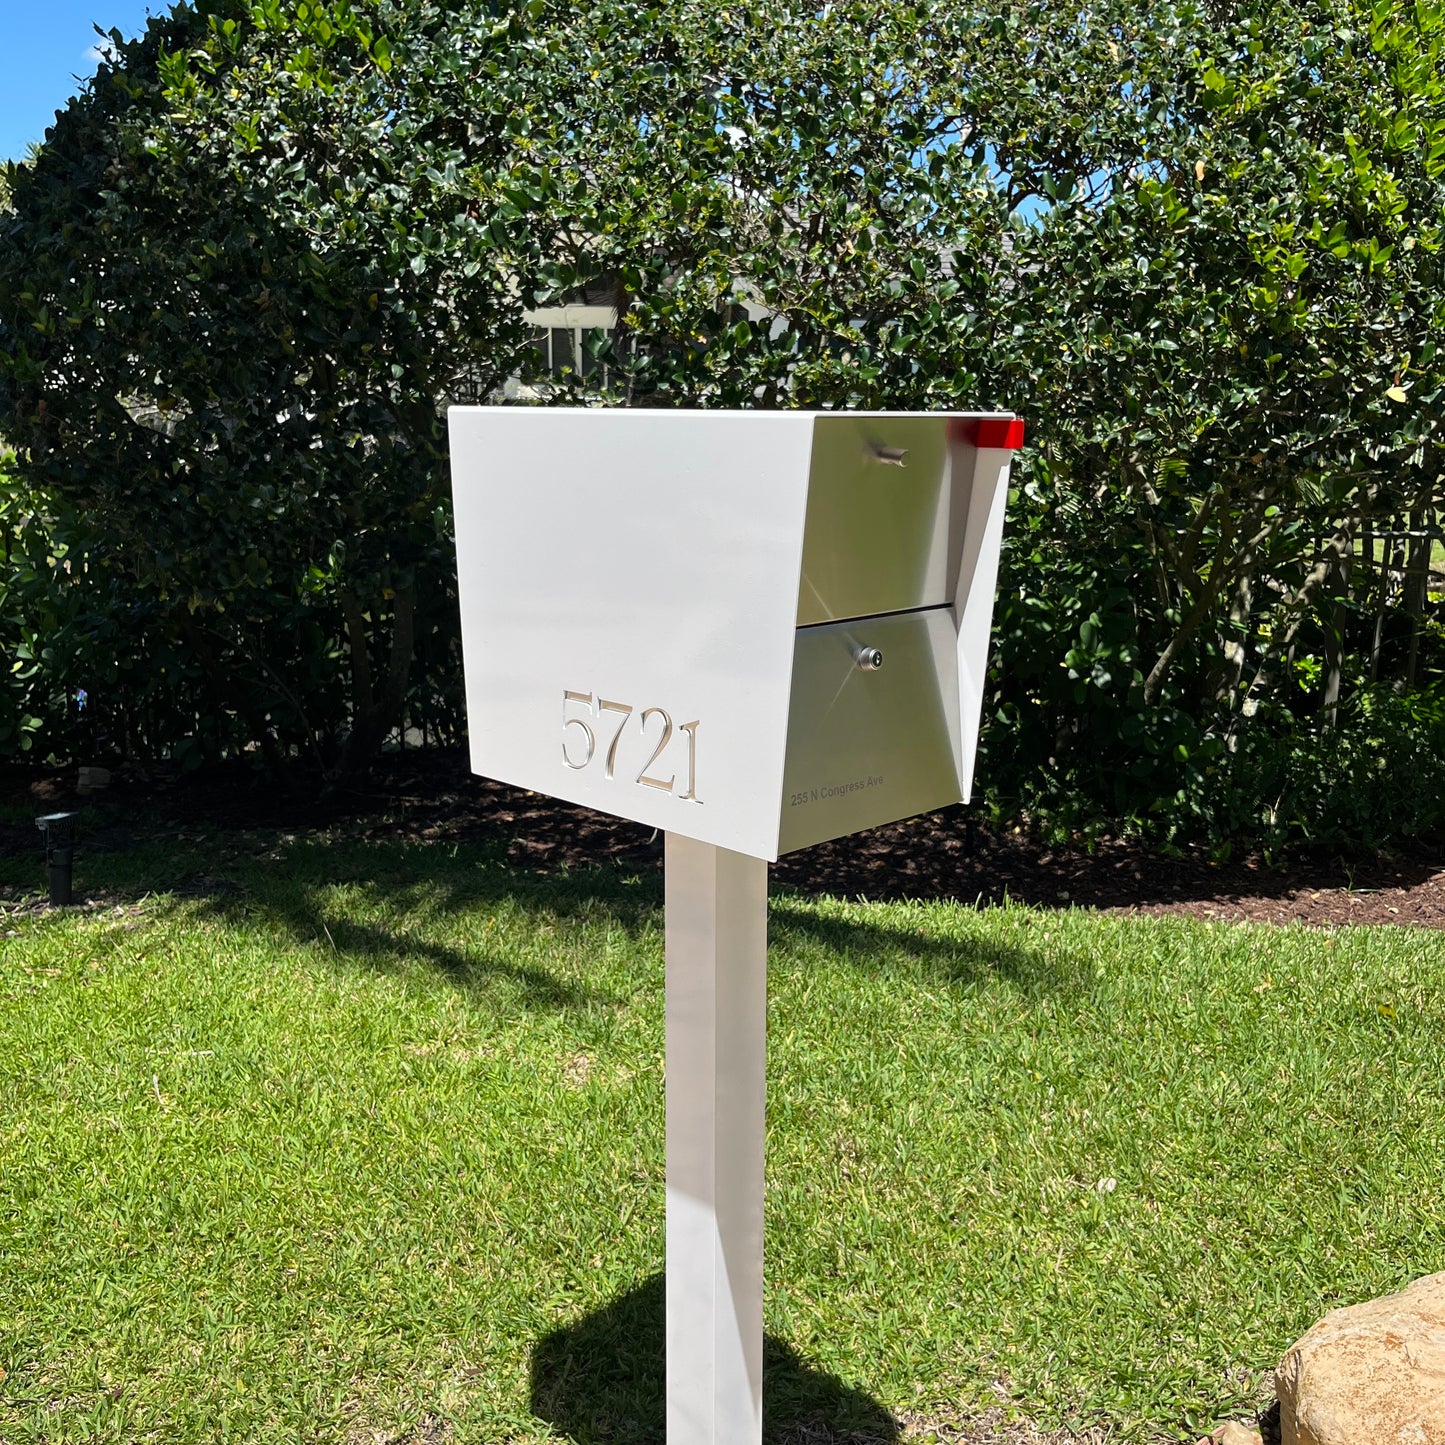 NEW! The UpTown Box Locking Package Dropbox in ARCTIC WHITE - Modern Mailbox